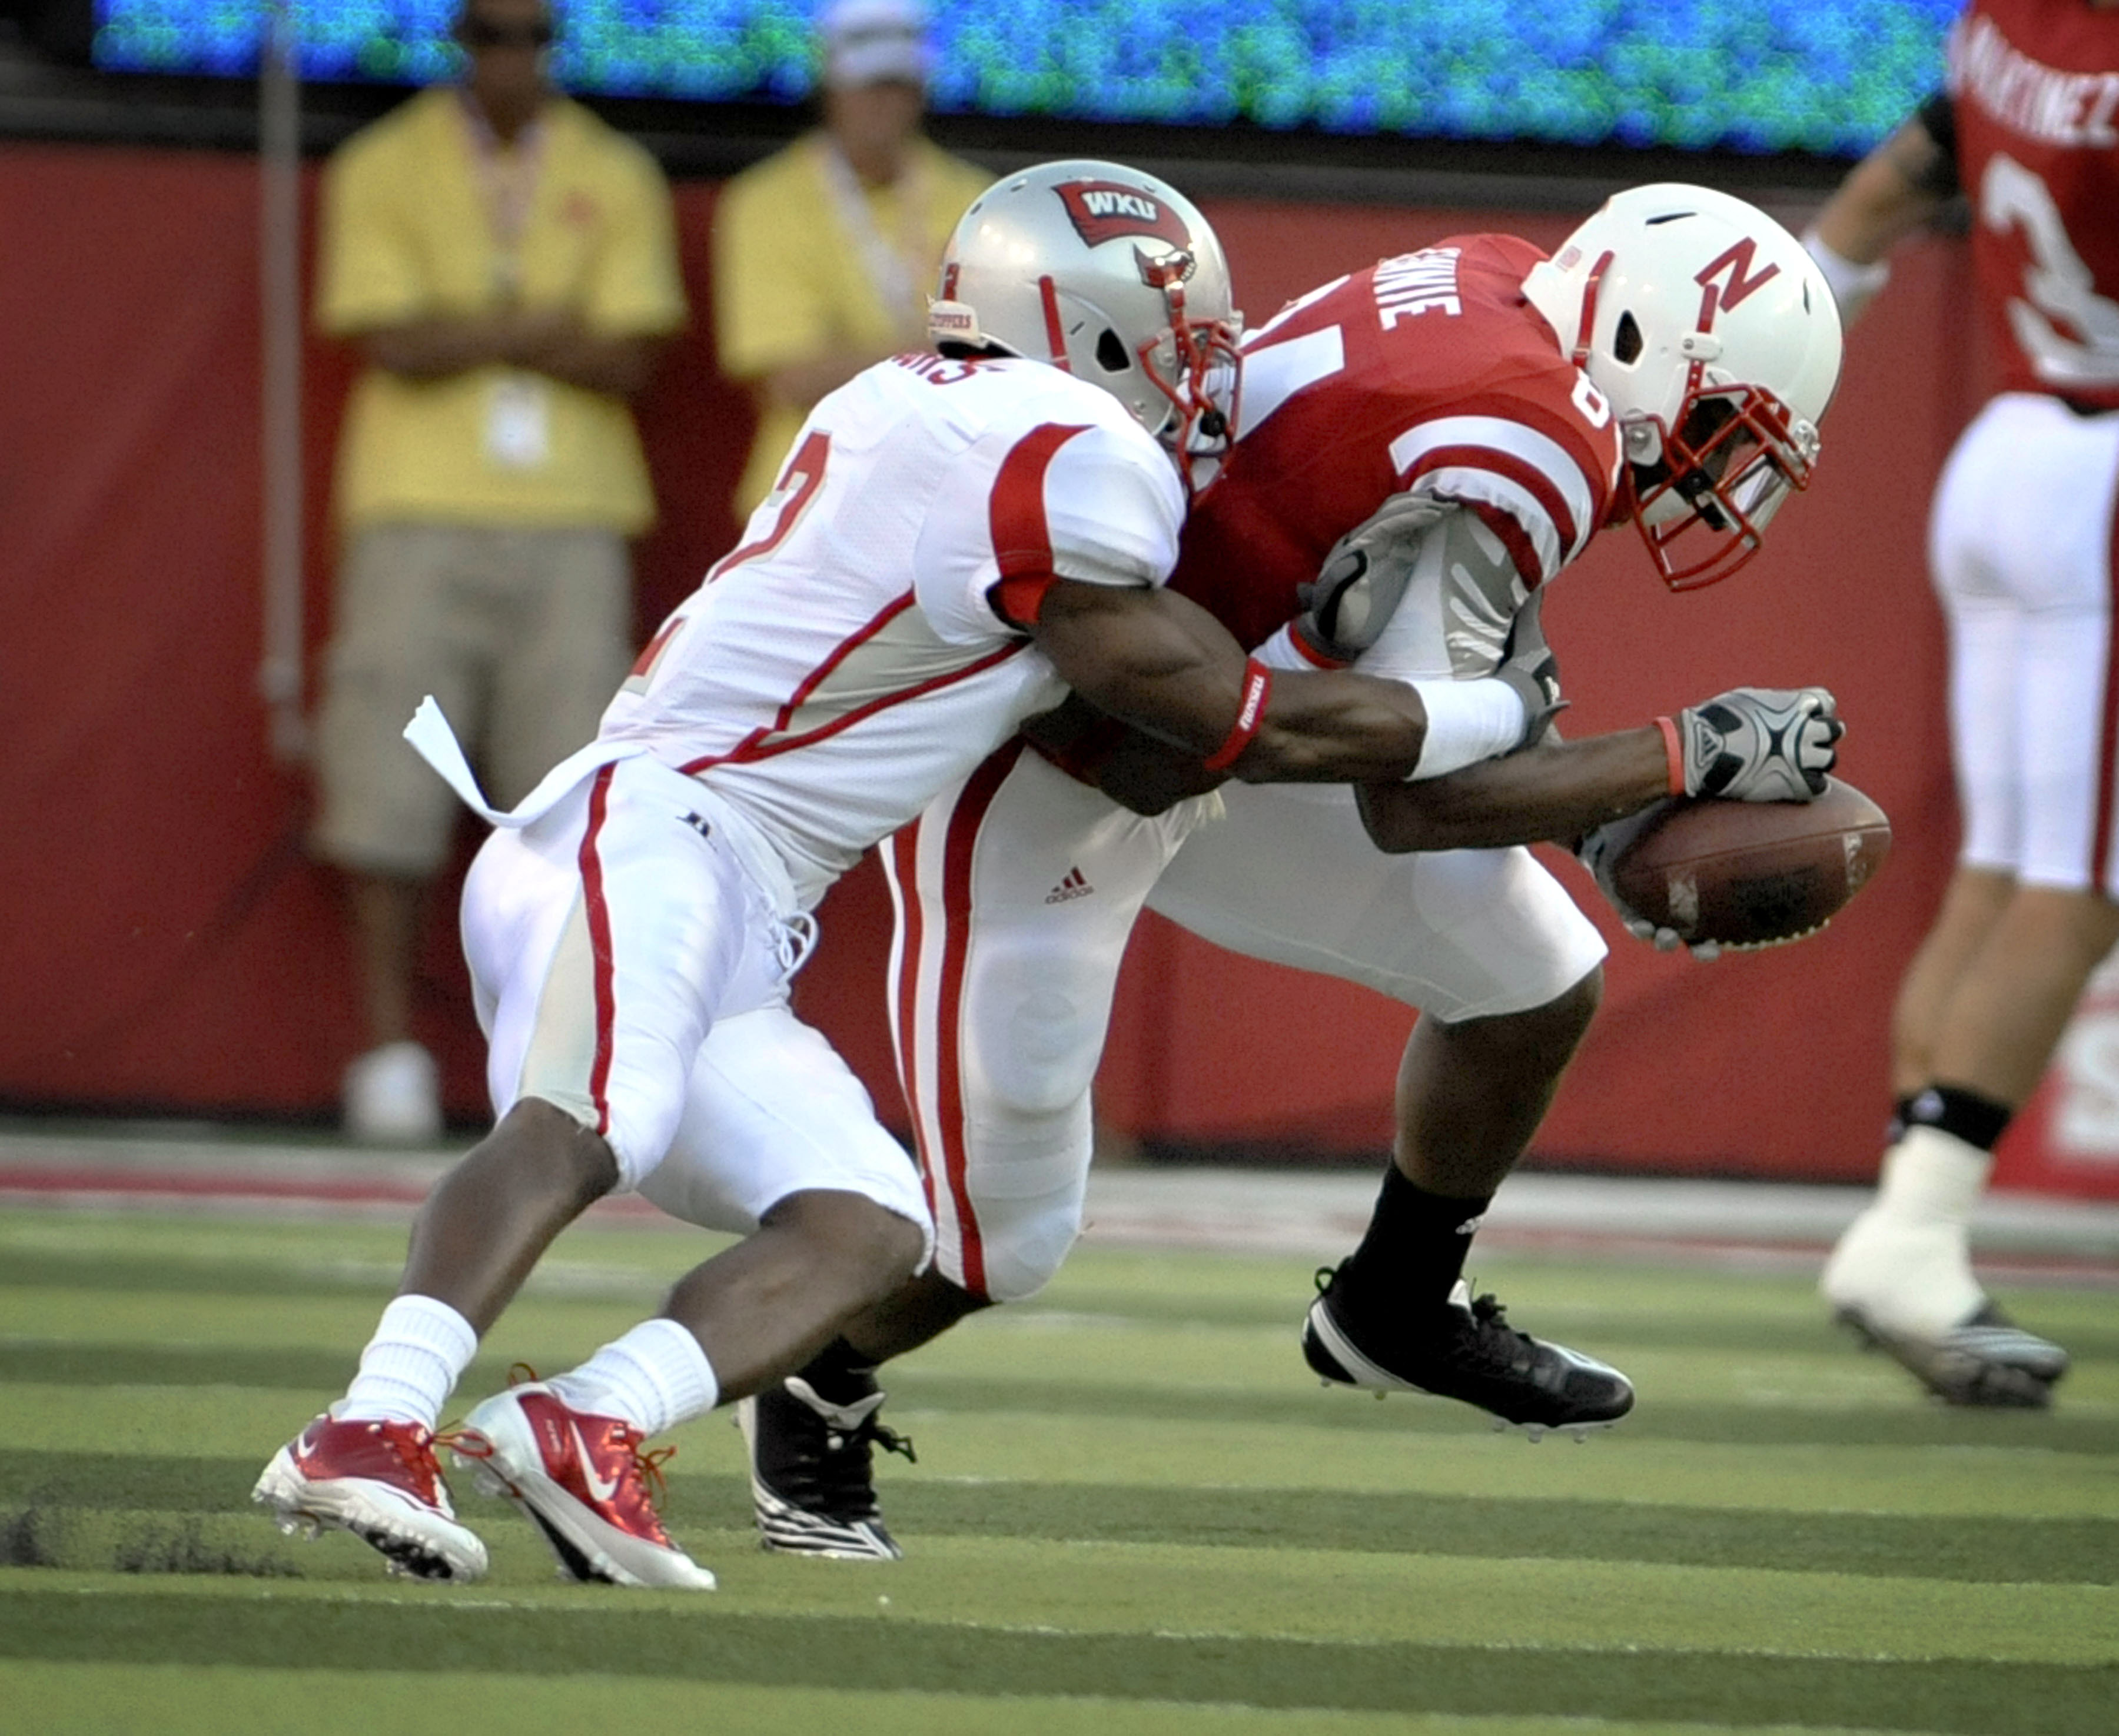 LINCOLN, NE - SEPTEMBER 04:  Brandon Kinnie #84 of the Nebraska Cornhuskers gets a pass knocked away by Derrius Brooks #2 of the Western Kentucky Hilltoppers during the first half at Memorial Stadium on September 4, 2010 in Lincoln, Nebraska.  (Photo by E